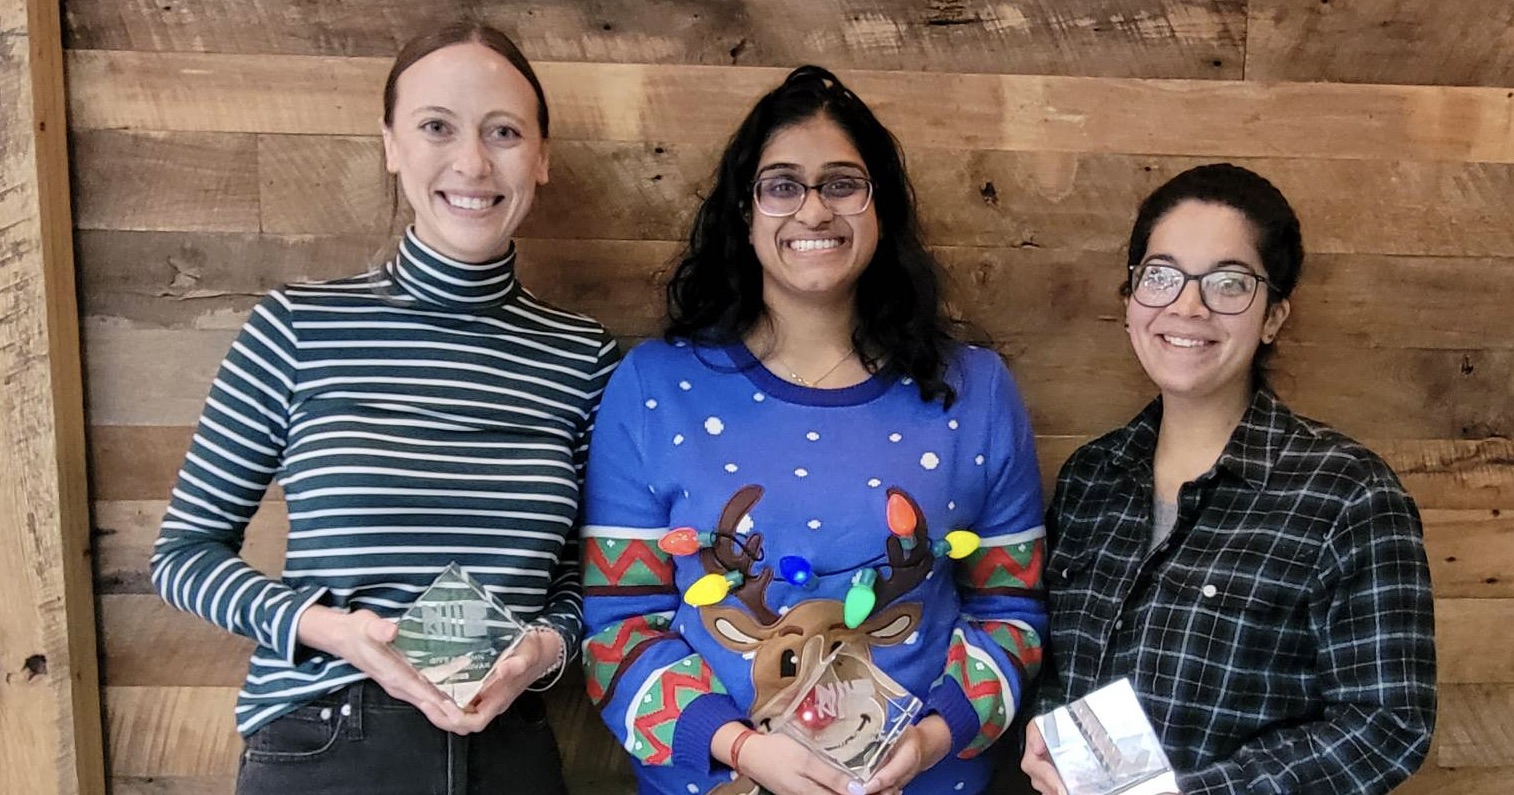 Three people are standing side by side, smiling and holding awards. The person on the left wears a striped turtleneck, the person in the center is in a festive reindeer sweater, and the person on the right wears glasses and a plaid shirt. The background features a wooden wall.